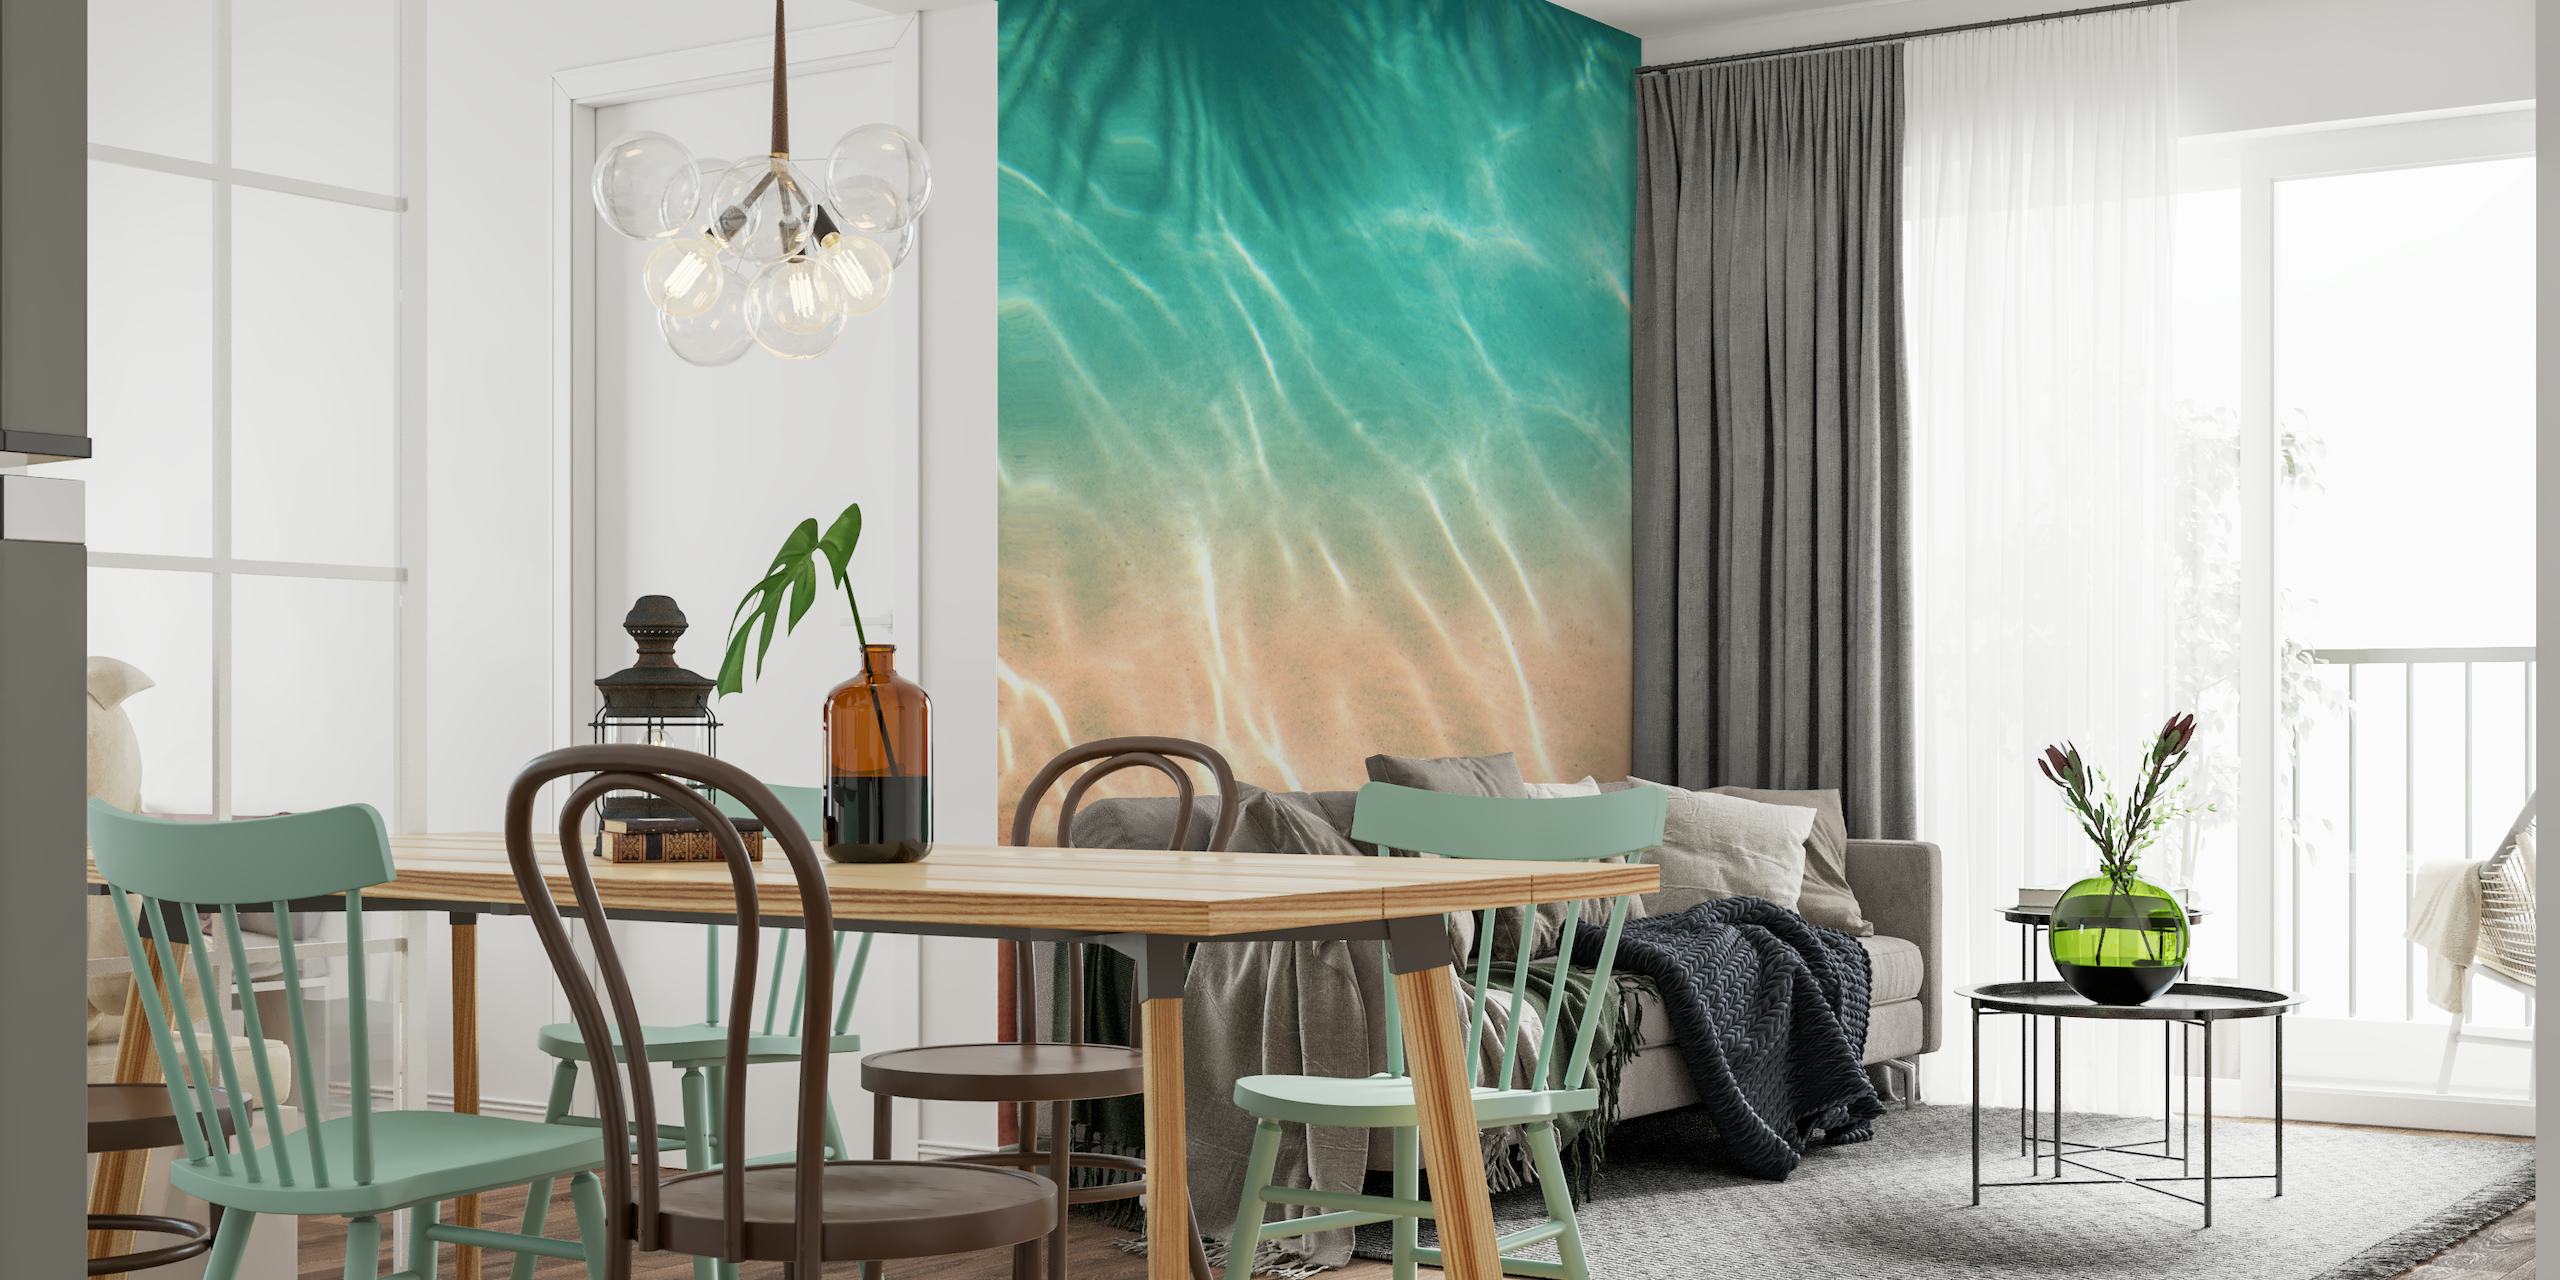 Caribbean-inspired pool water wall mural with a gradient from turquoise to pink.